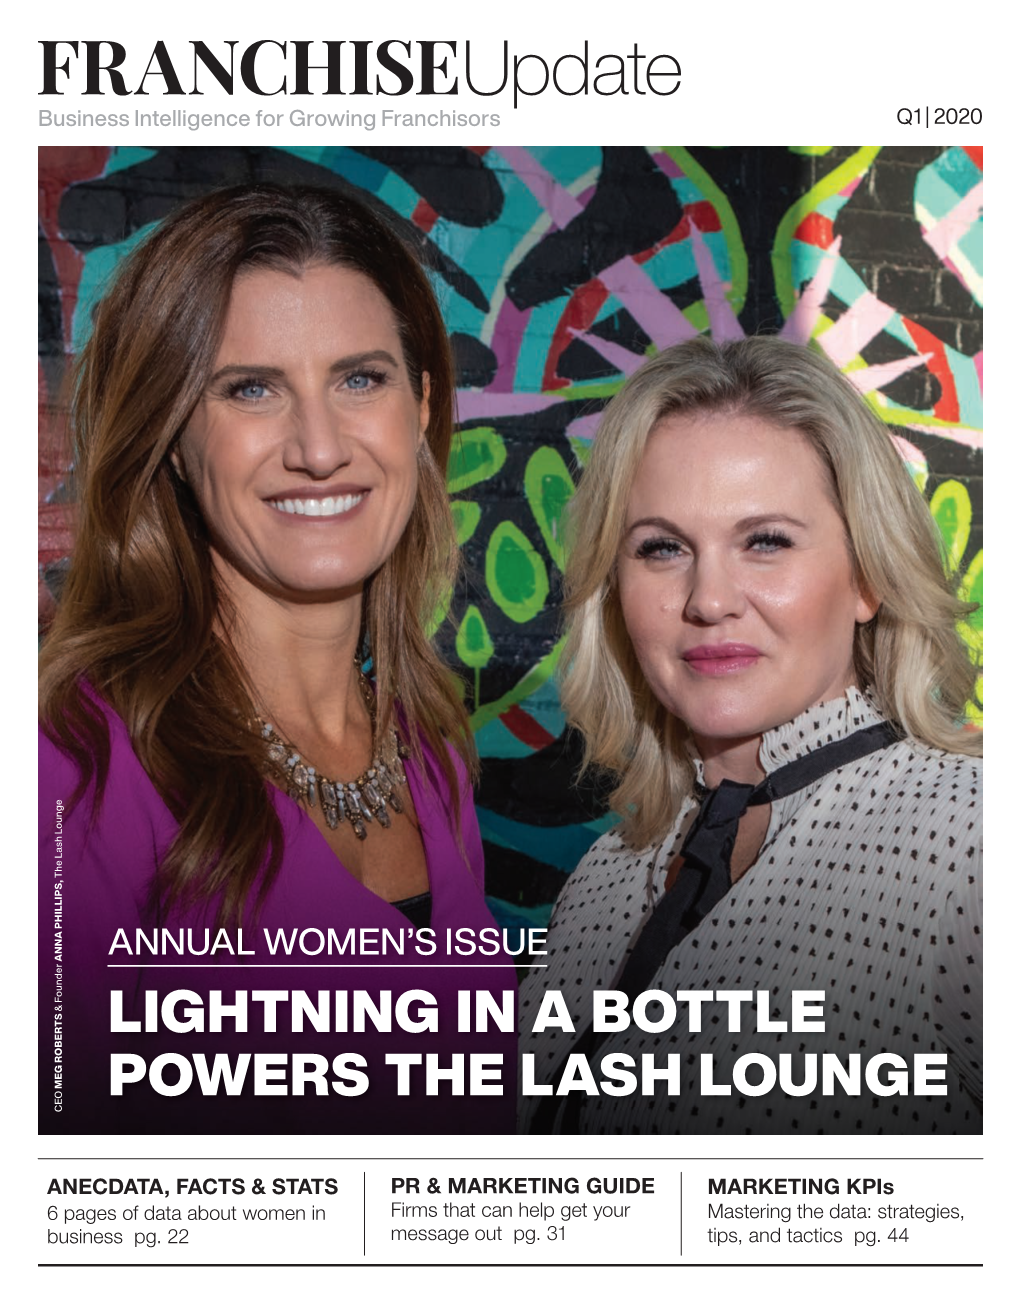 Lightning in a Bottle Powers the Lash Lounge